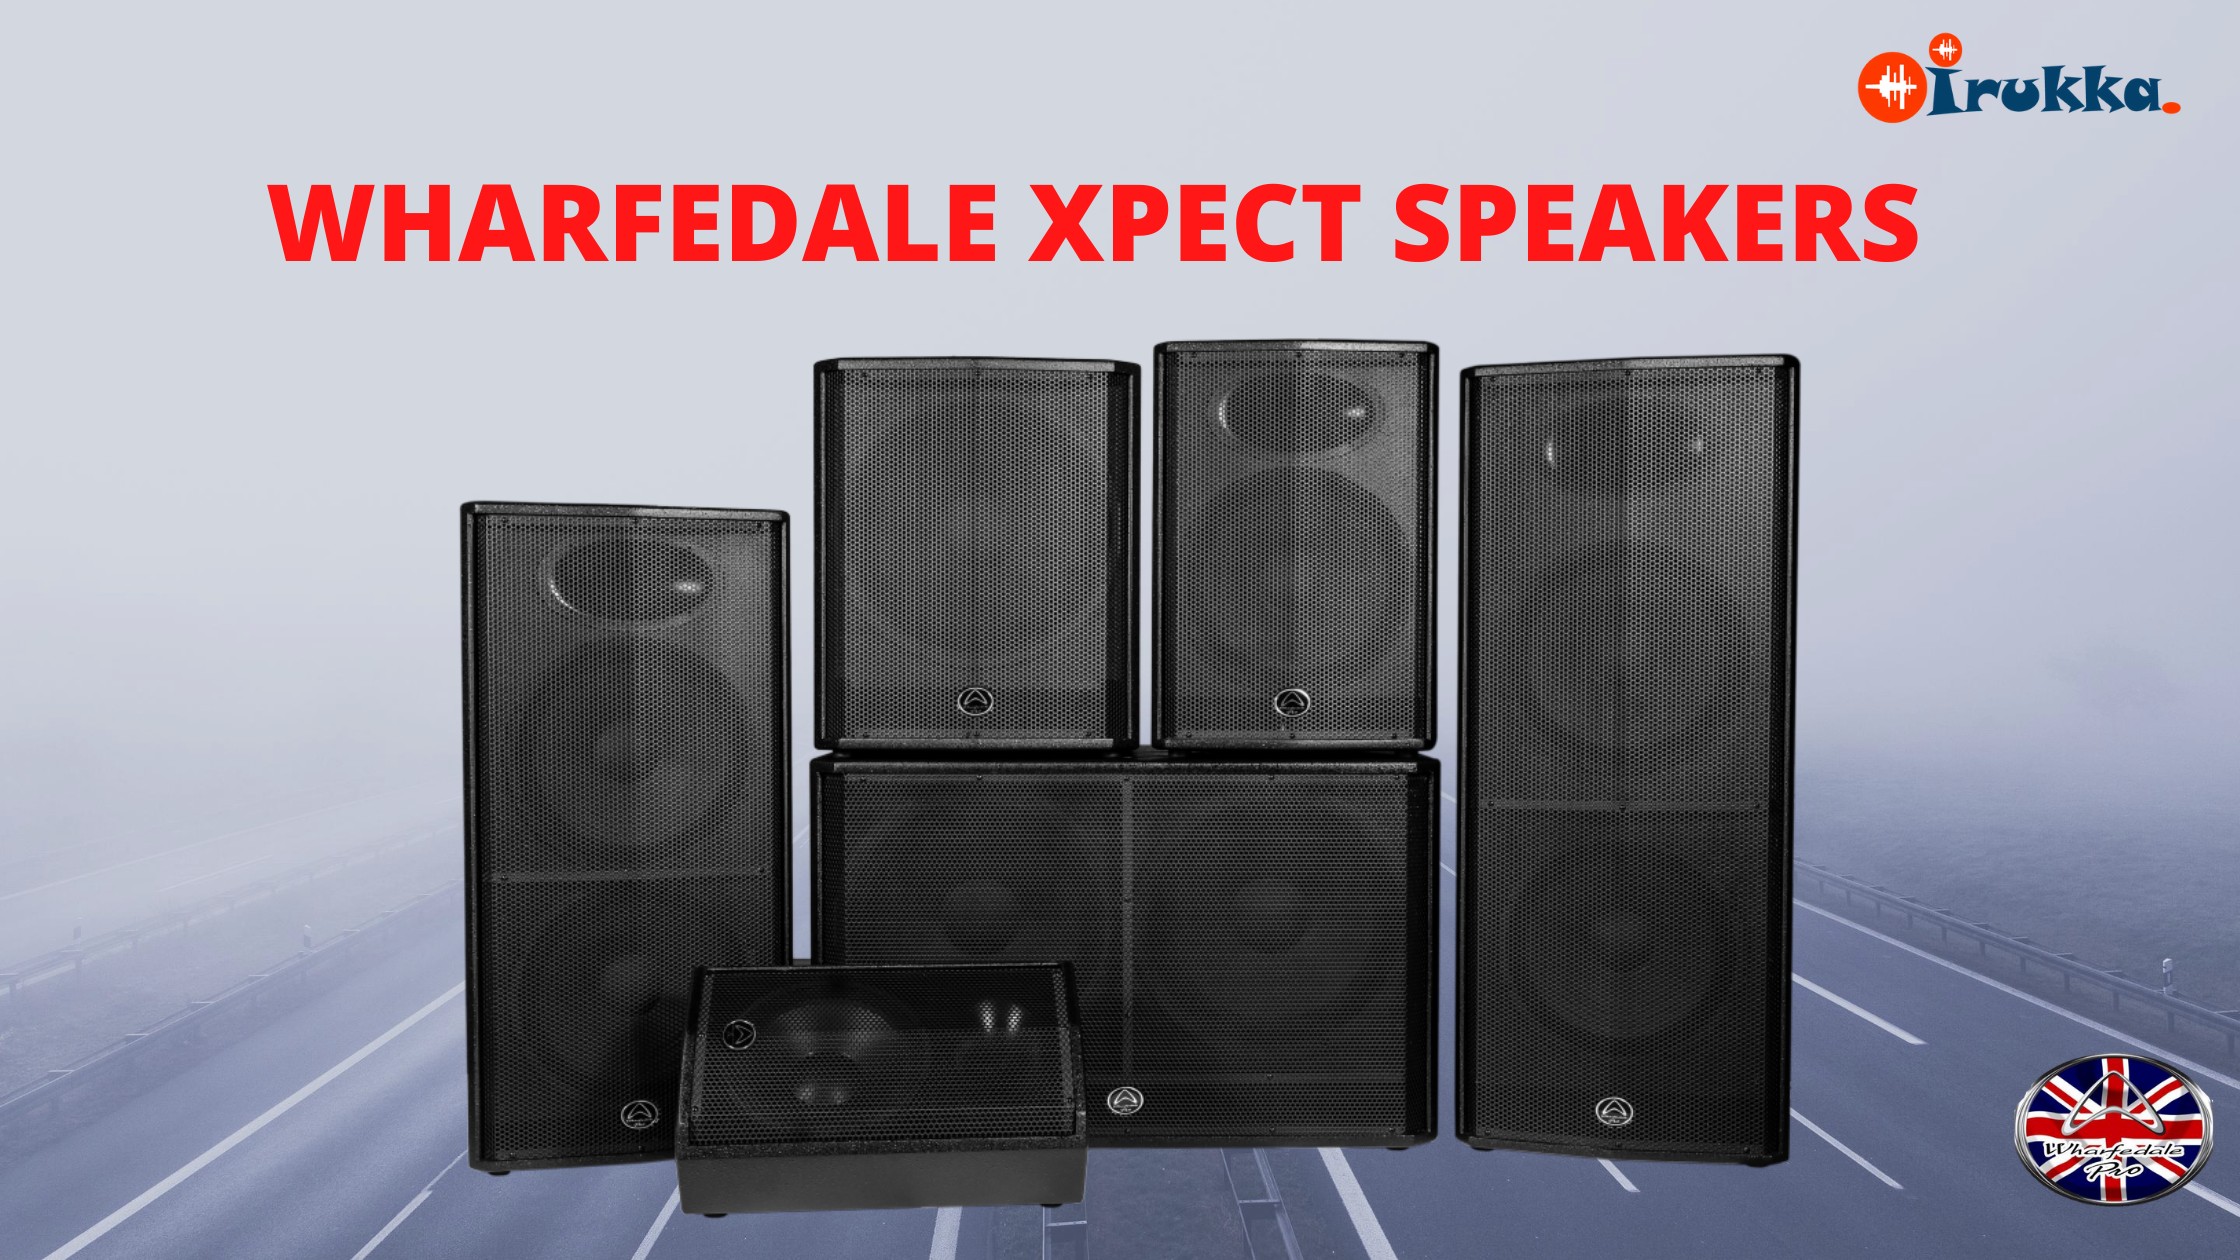 PROFESSIONAL AUDIO: WHARFEDALE PRO XPECT-THE NEW THUNDERBOLT➔IRUKKA ONLINE- WHARFEDALE PRO INTRODUCES WHARFEDALE XPECT SPEAKER SERIES➔ A DIFFERENT KIND OF WHARFEDALE SPEAKERS UNIQUELY FOR PROFESSIONAL AUDIO PERFORMANCE➔ CHURCH SPEAKERS IN NIGERIA➔ SPEAKERS FOR YOUR EVENTS➔ PROFESSIONAL LOUDSPEAKERS FOR NIGHTCLUBS➔